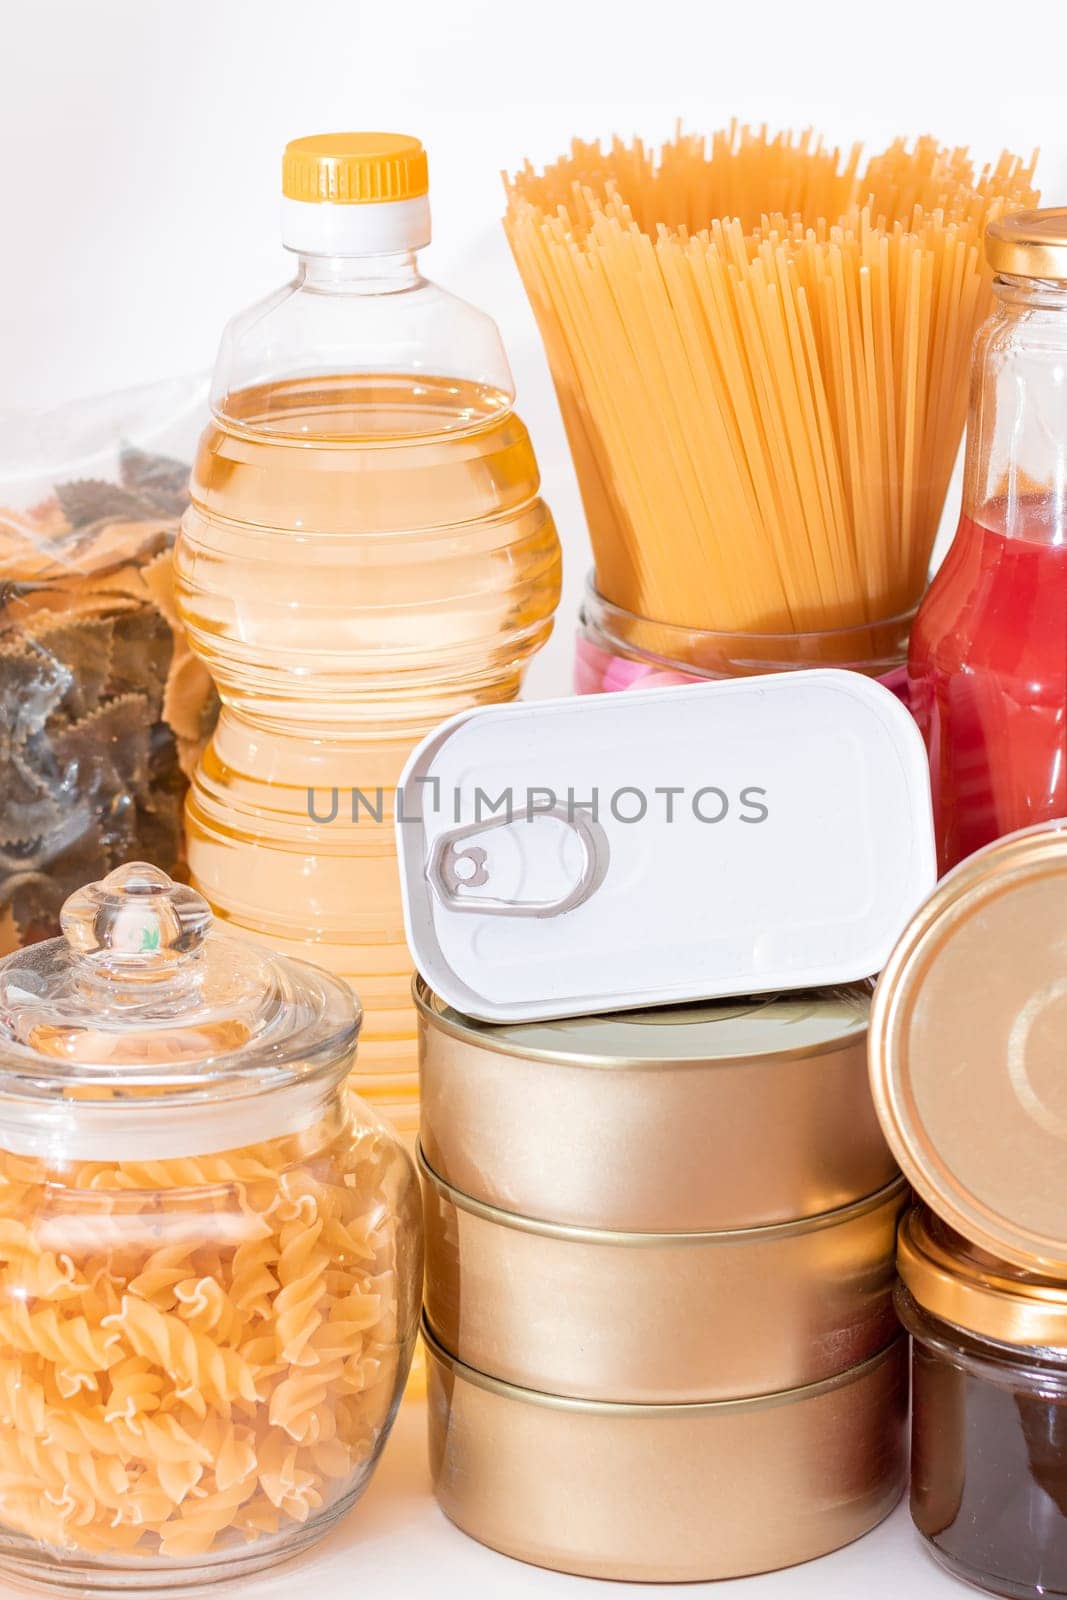 Food Reserves: Canned Food, Spaghetti, Tomato Juice, Pasta and Grocery by InfinitumProdux